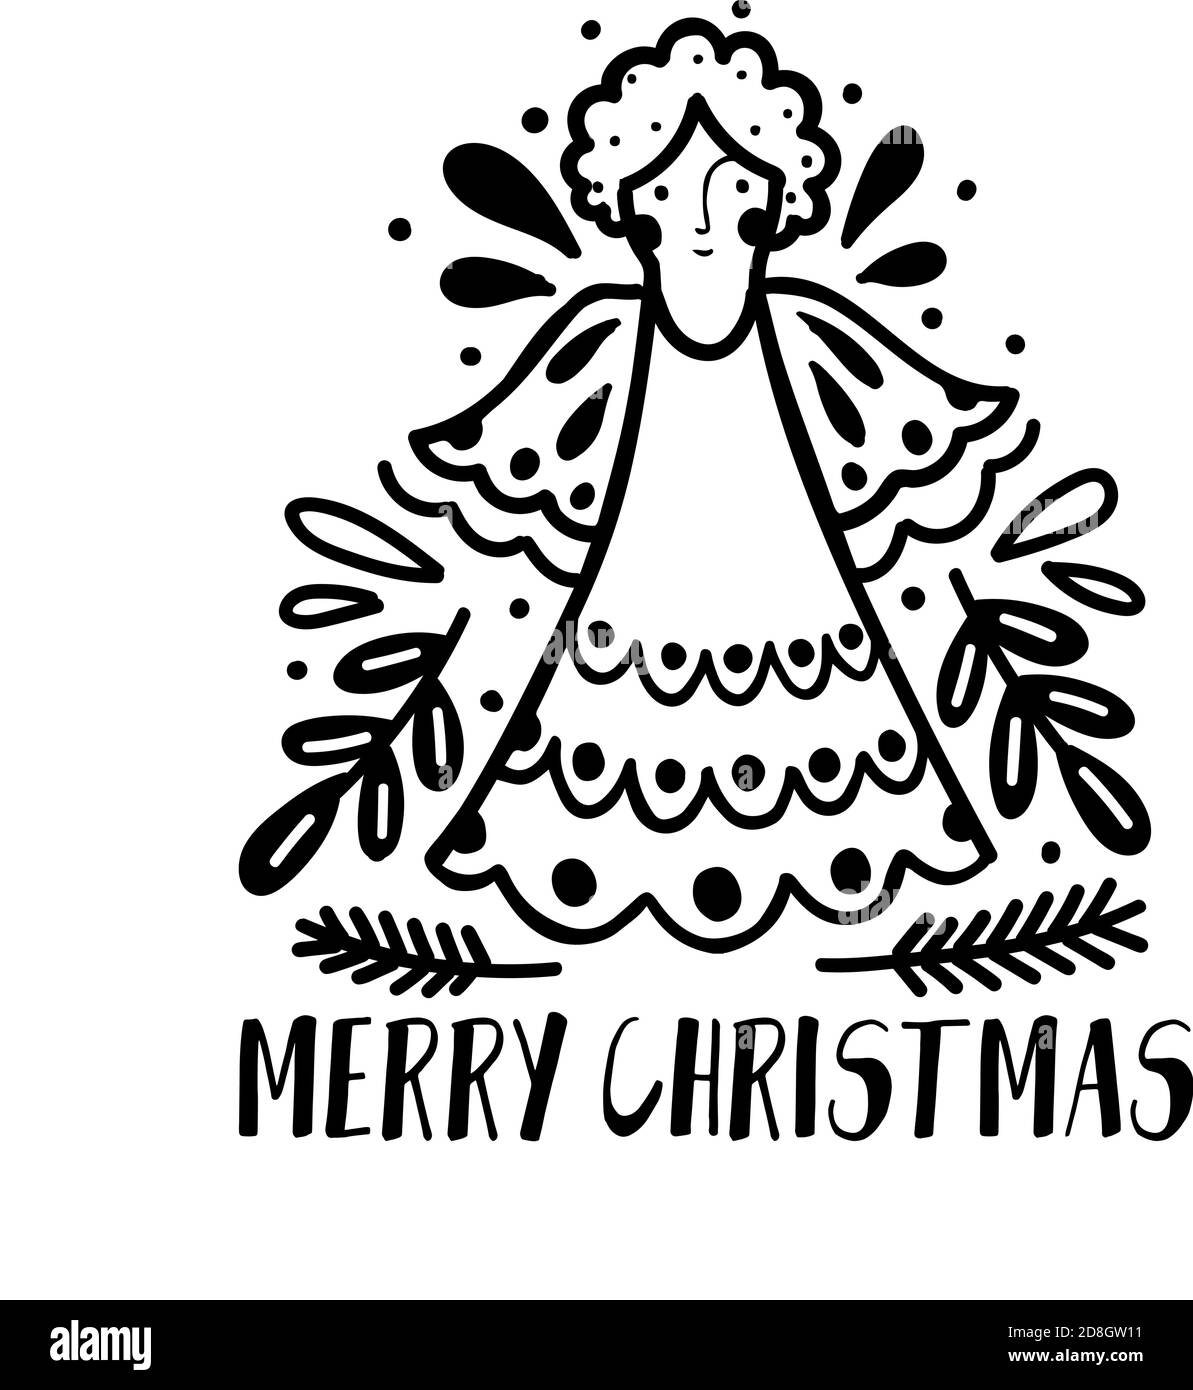 Merry Christmas decoration hand drawn.Doodle style greeting card with christmas angel Stock Vector